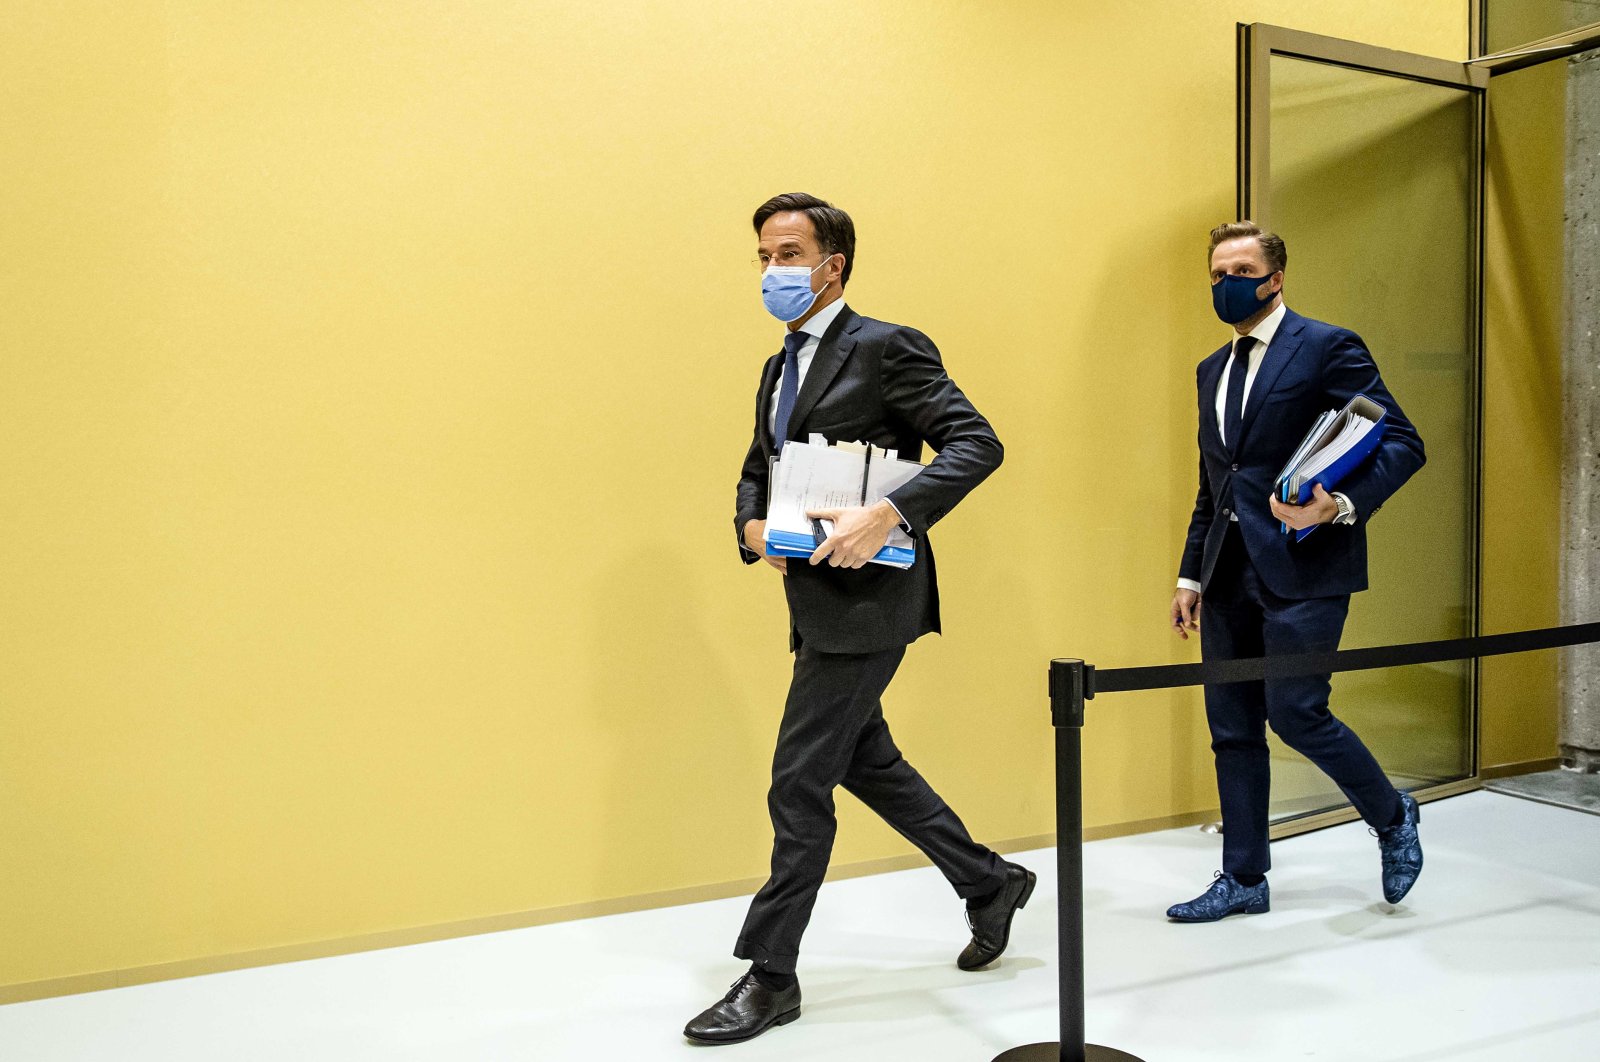 Outgoing Prime Minister Mark Rutte (L) and Hugo de Jonge, outgoing Minister for Public Health, Welfare and Sport (R) walk during a suspension of the debate about the developments surrounding the coronavirus in the House of Representatives in The Hague, Netherlands, Dec. 1, 2021. (EPA Photo)